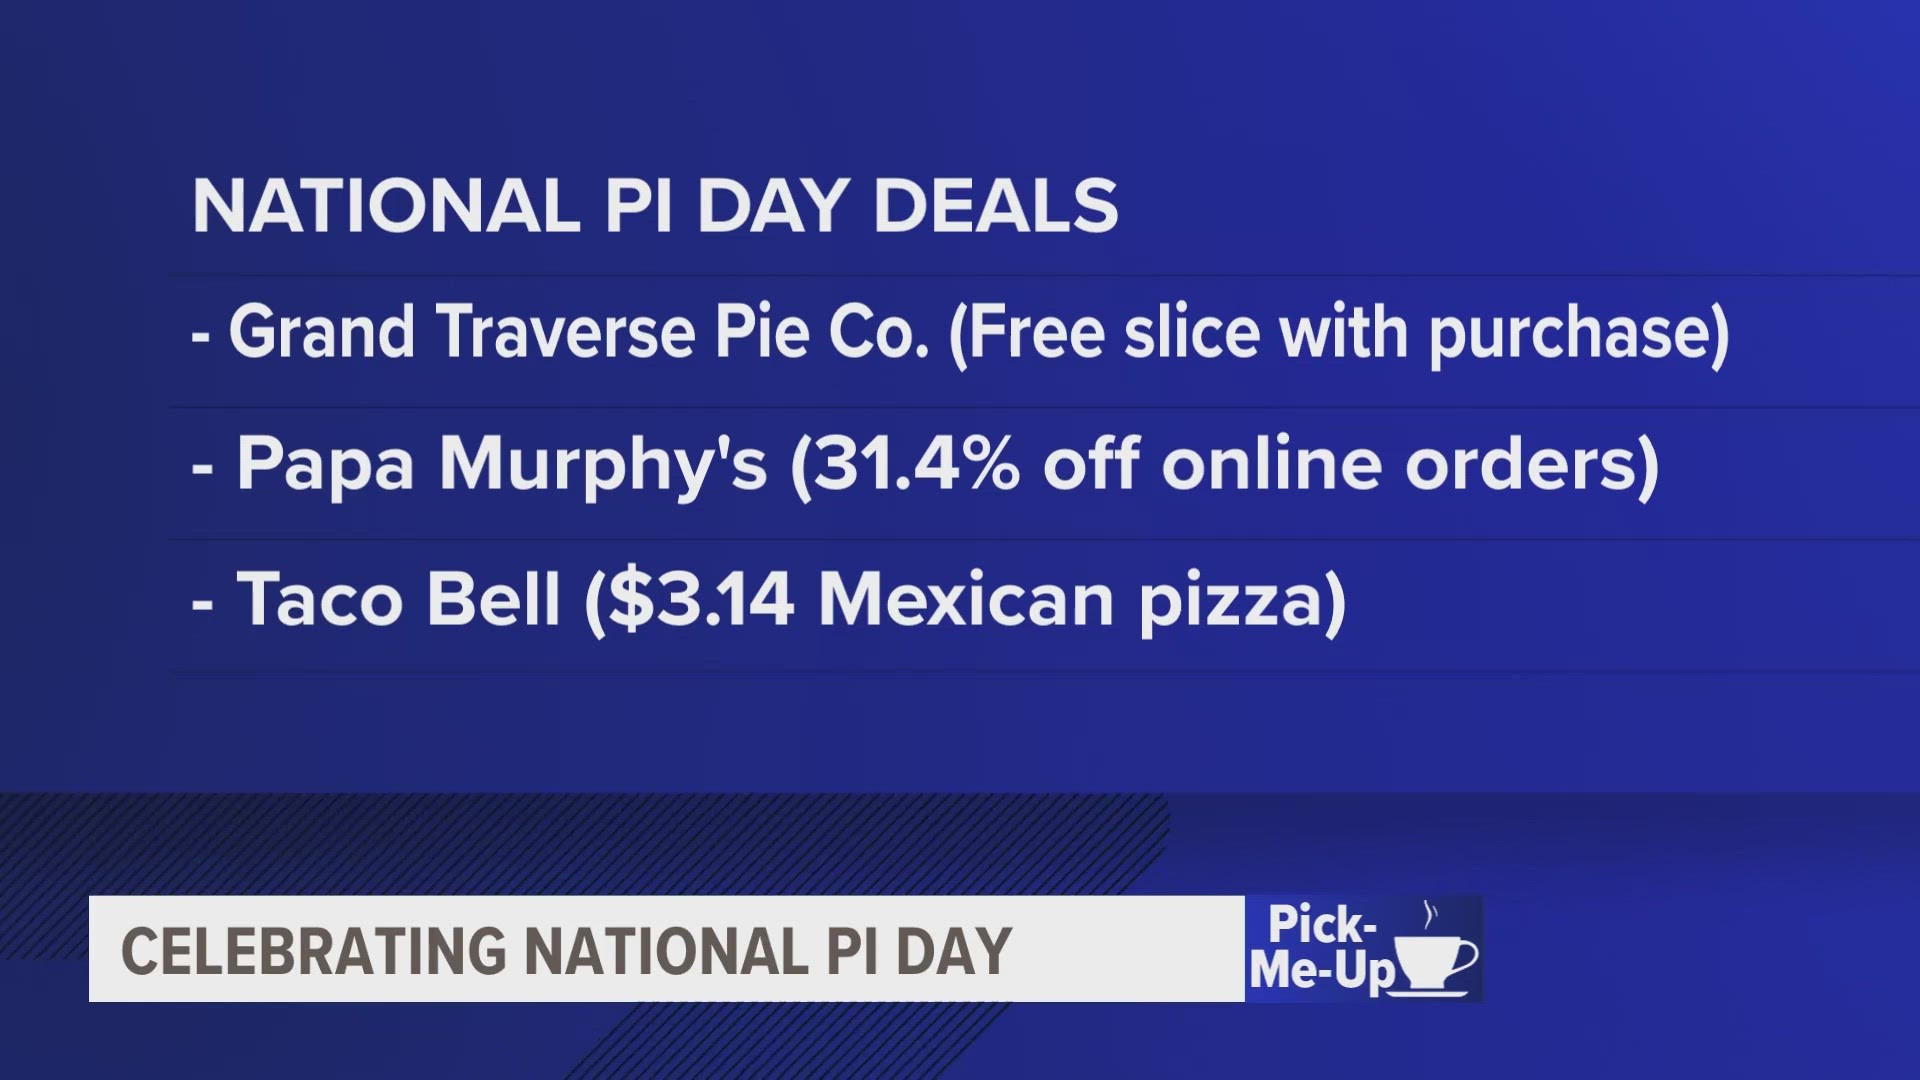 It's Pi Day! Here's what deals you can take advantage of to celebrate.